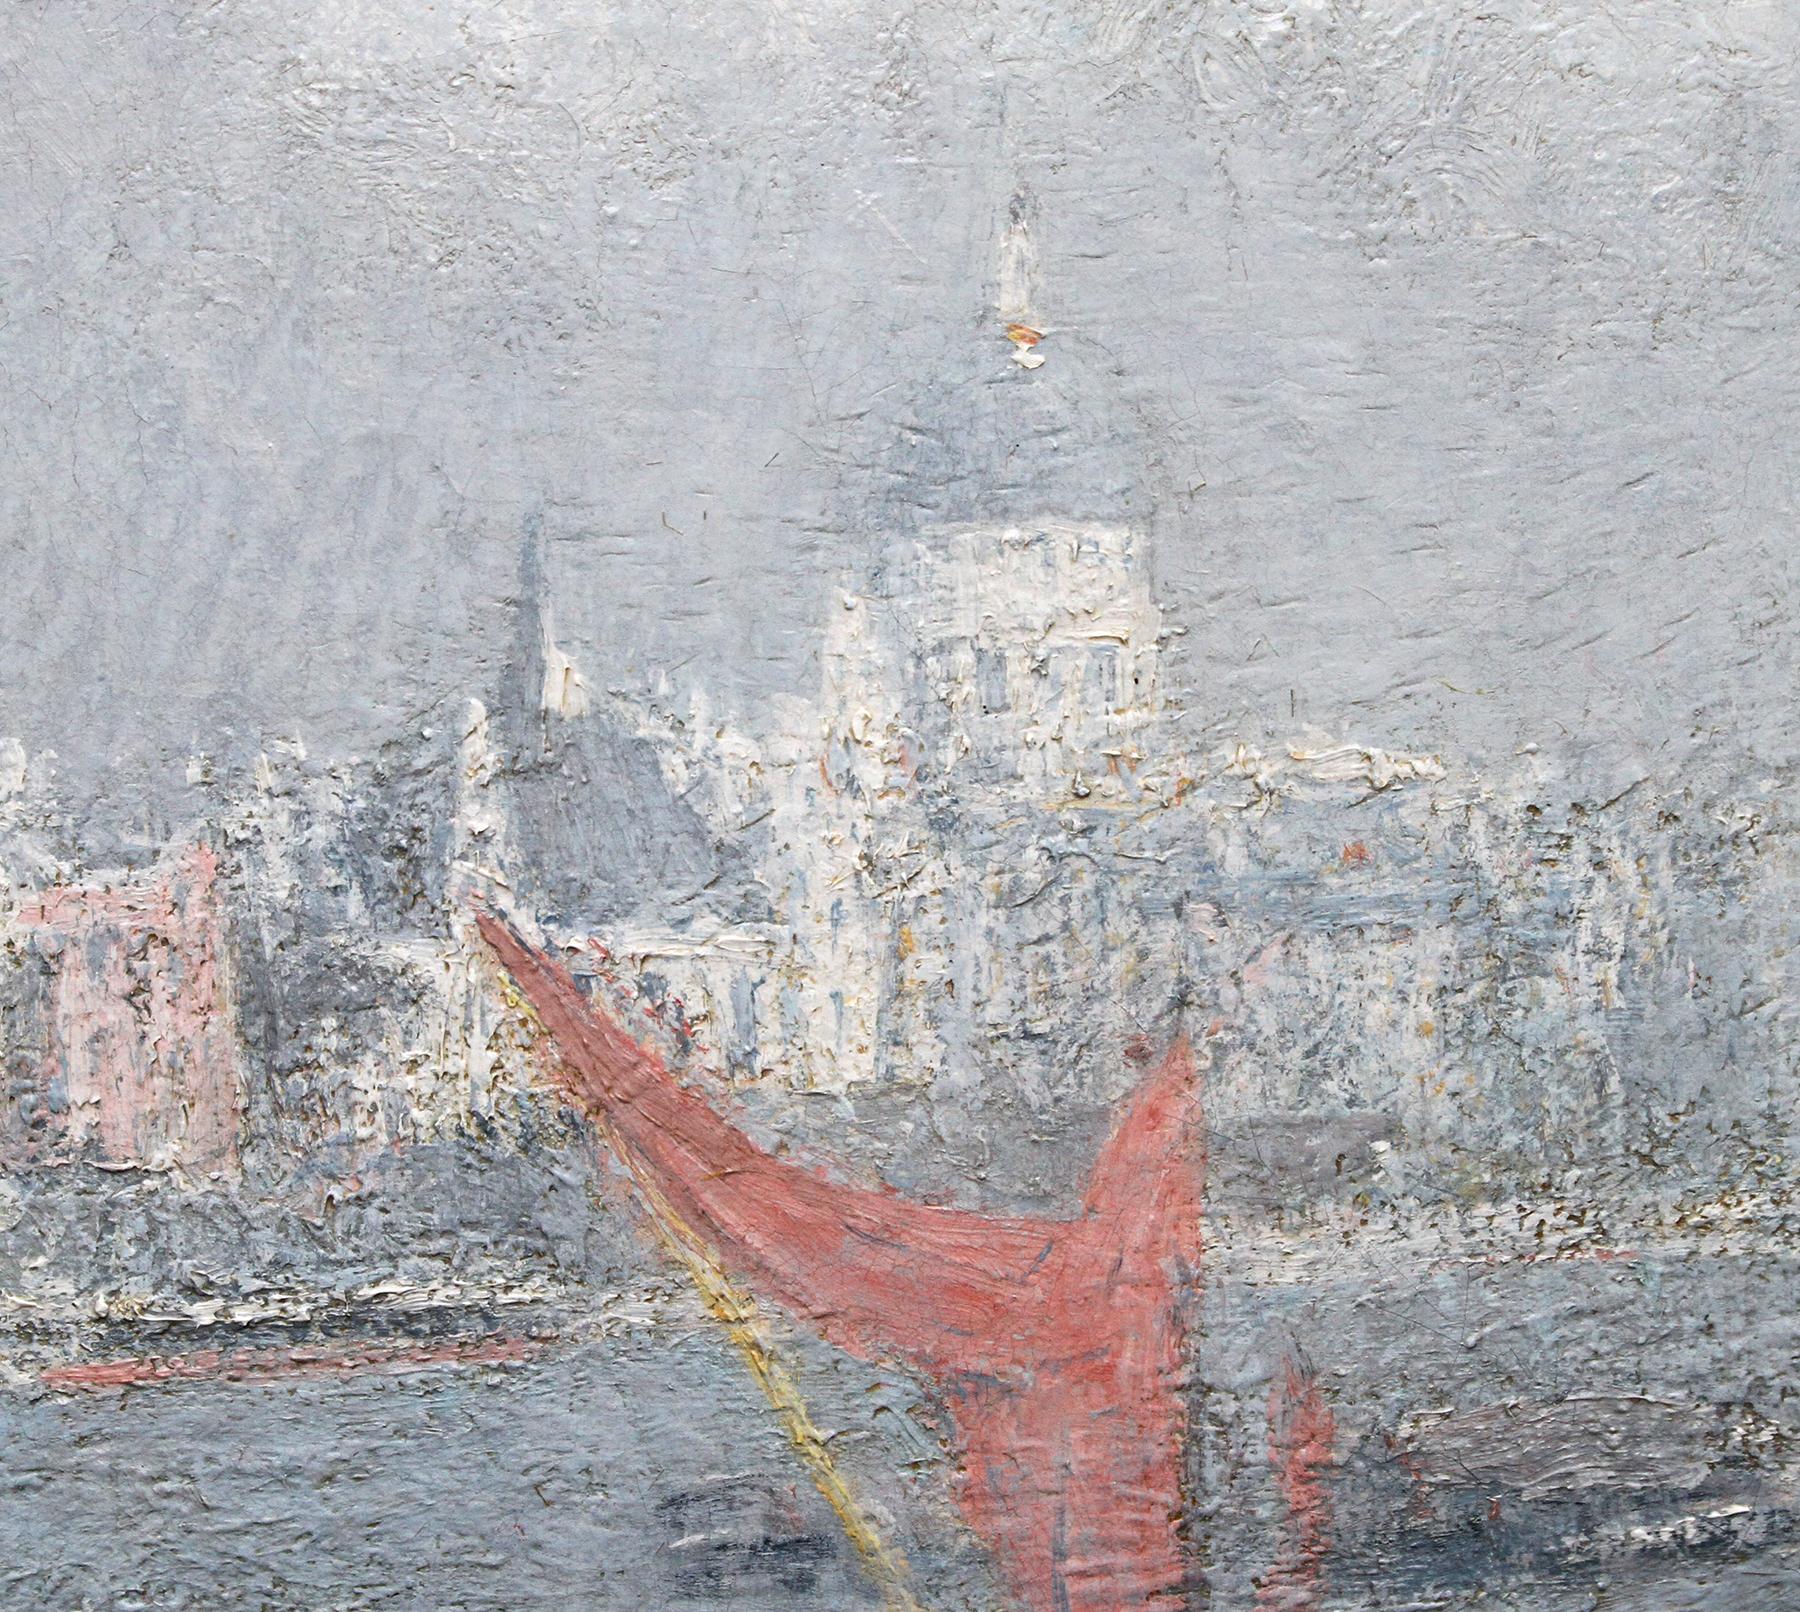 London St Paul's from the Thames - Impressionist 1920s landscape oil painting For Sale 3